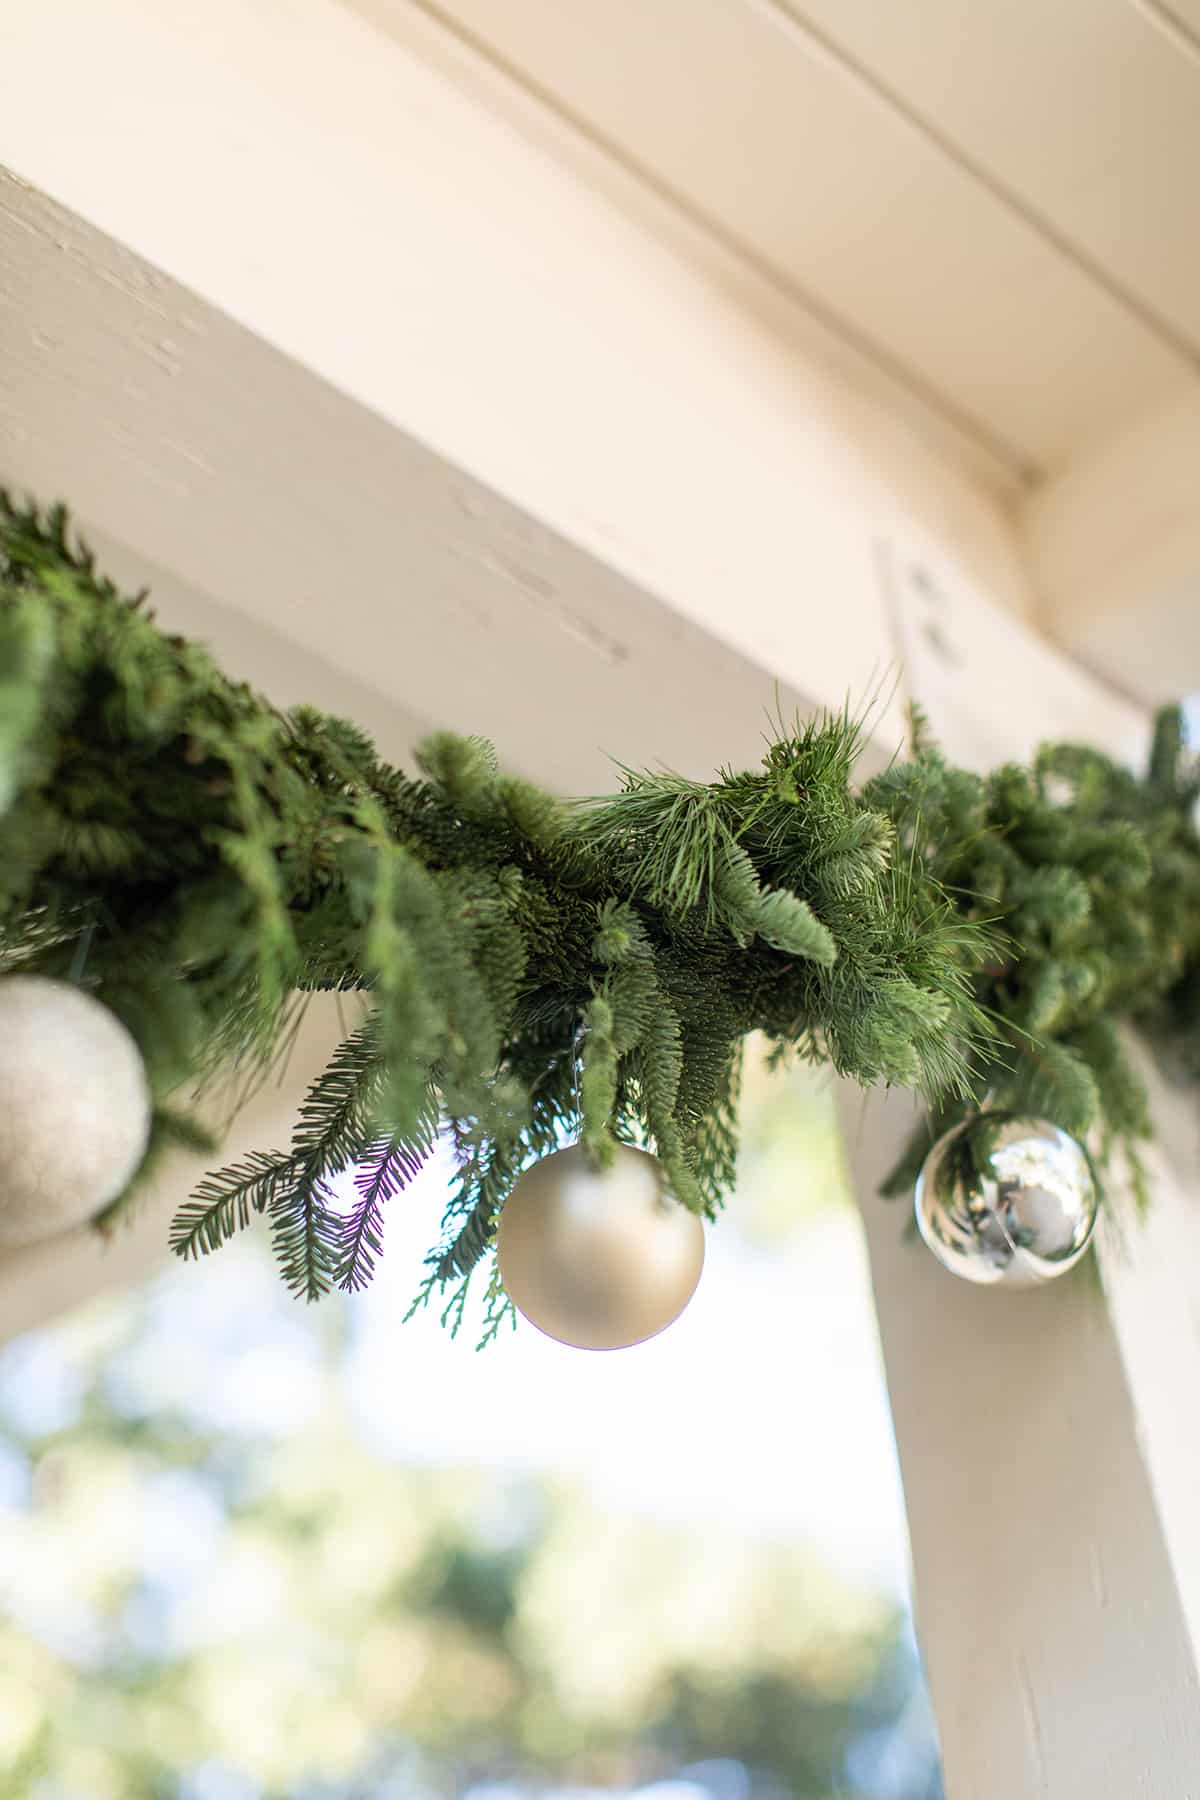 garland and ornaments in fresh garland hanging on a front porch.